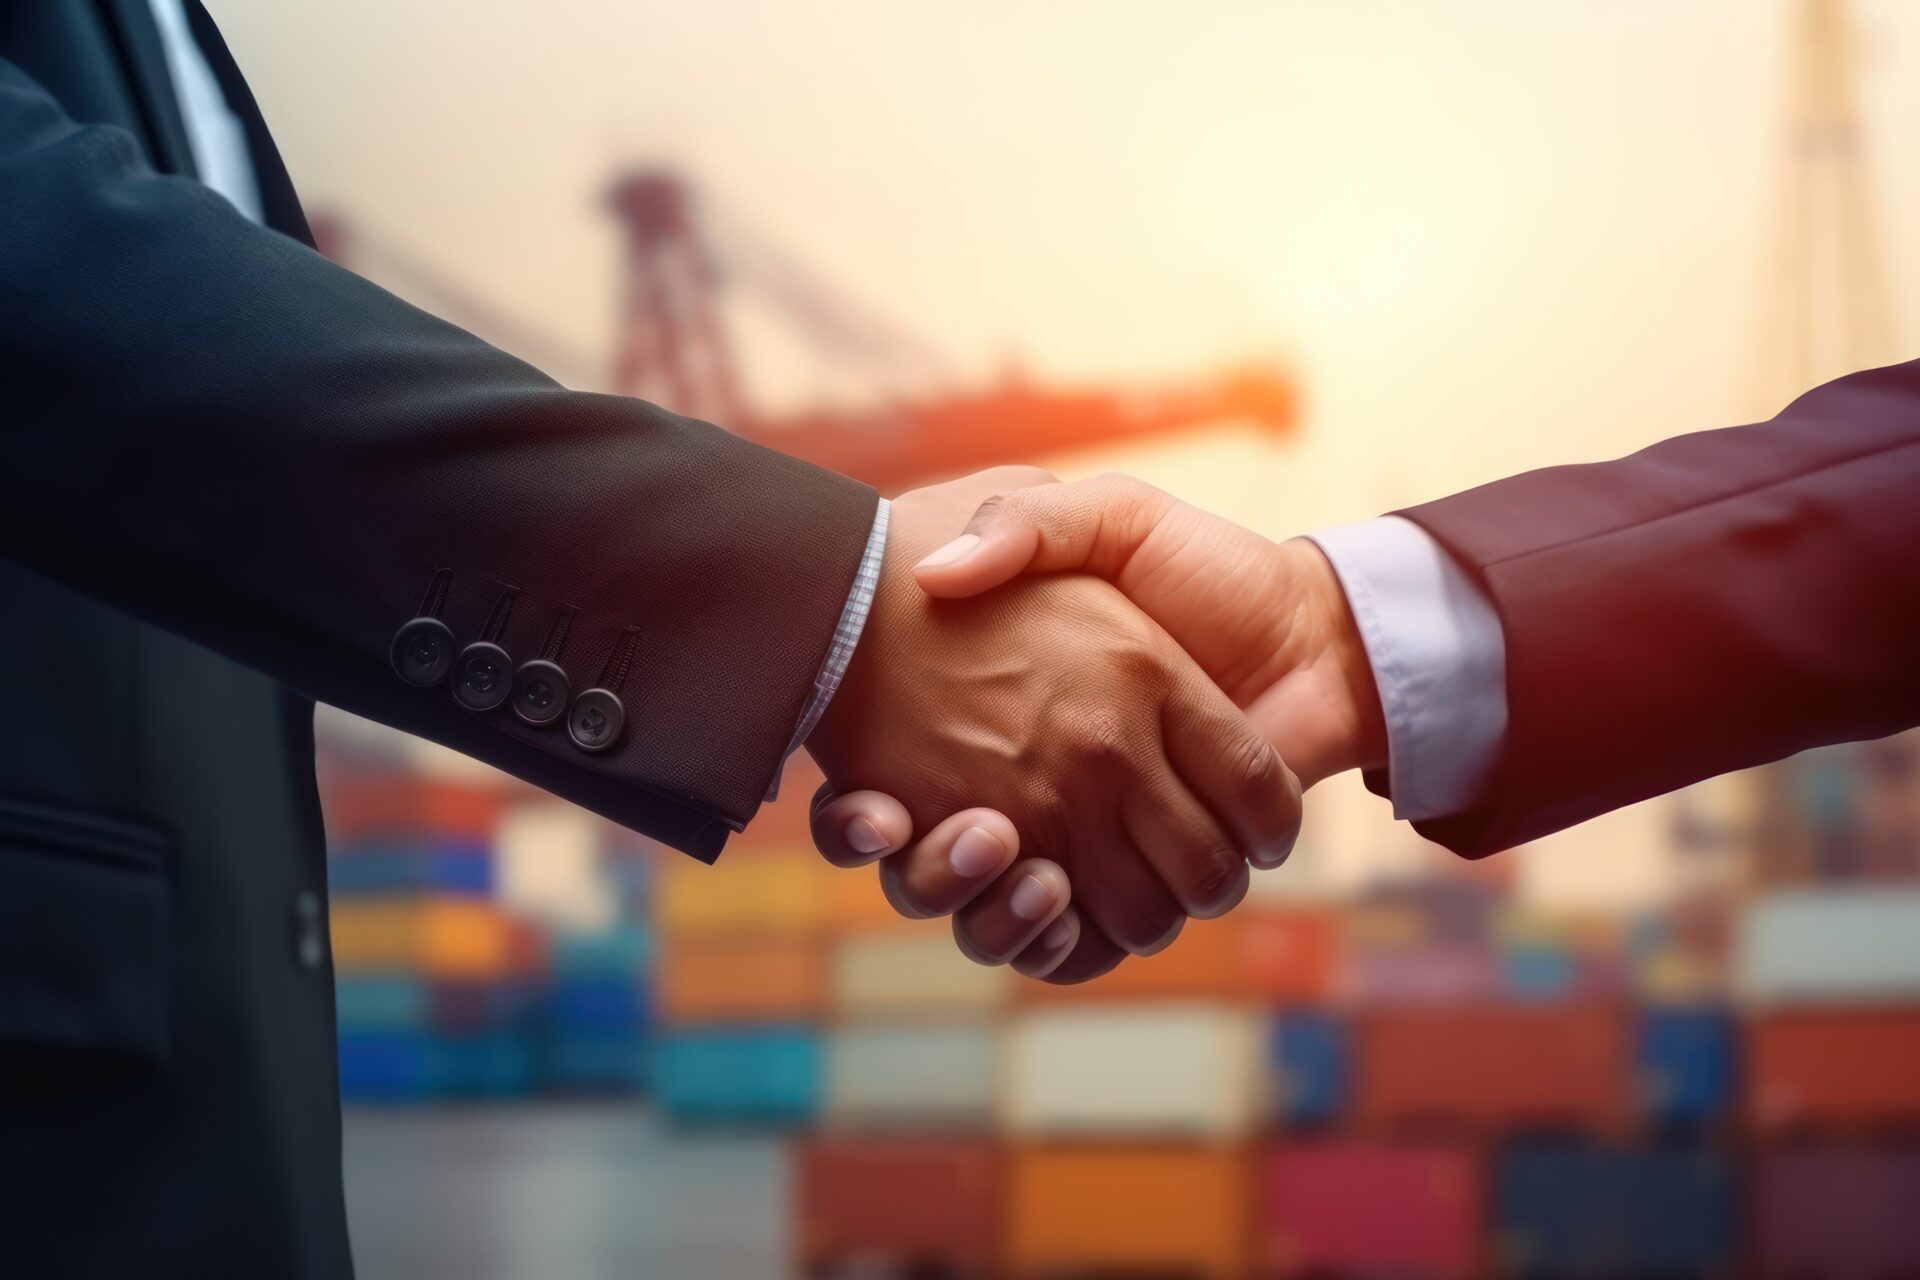 Handshake of two businessmen against the backdrop of a large container warehouse.